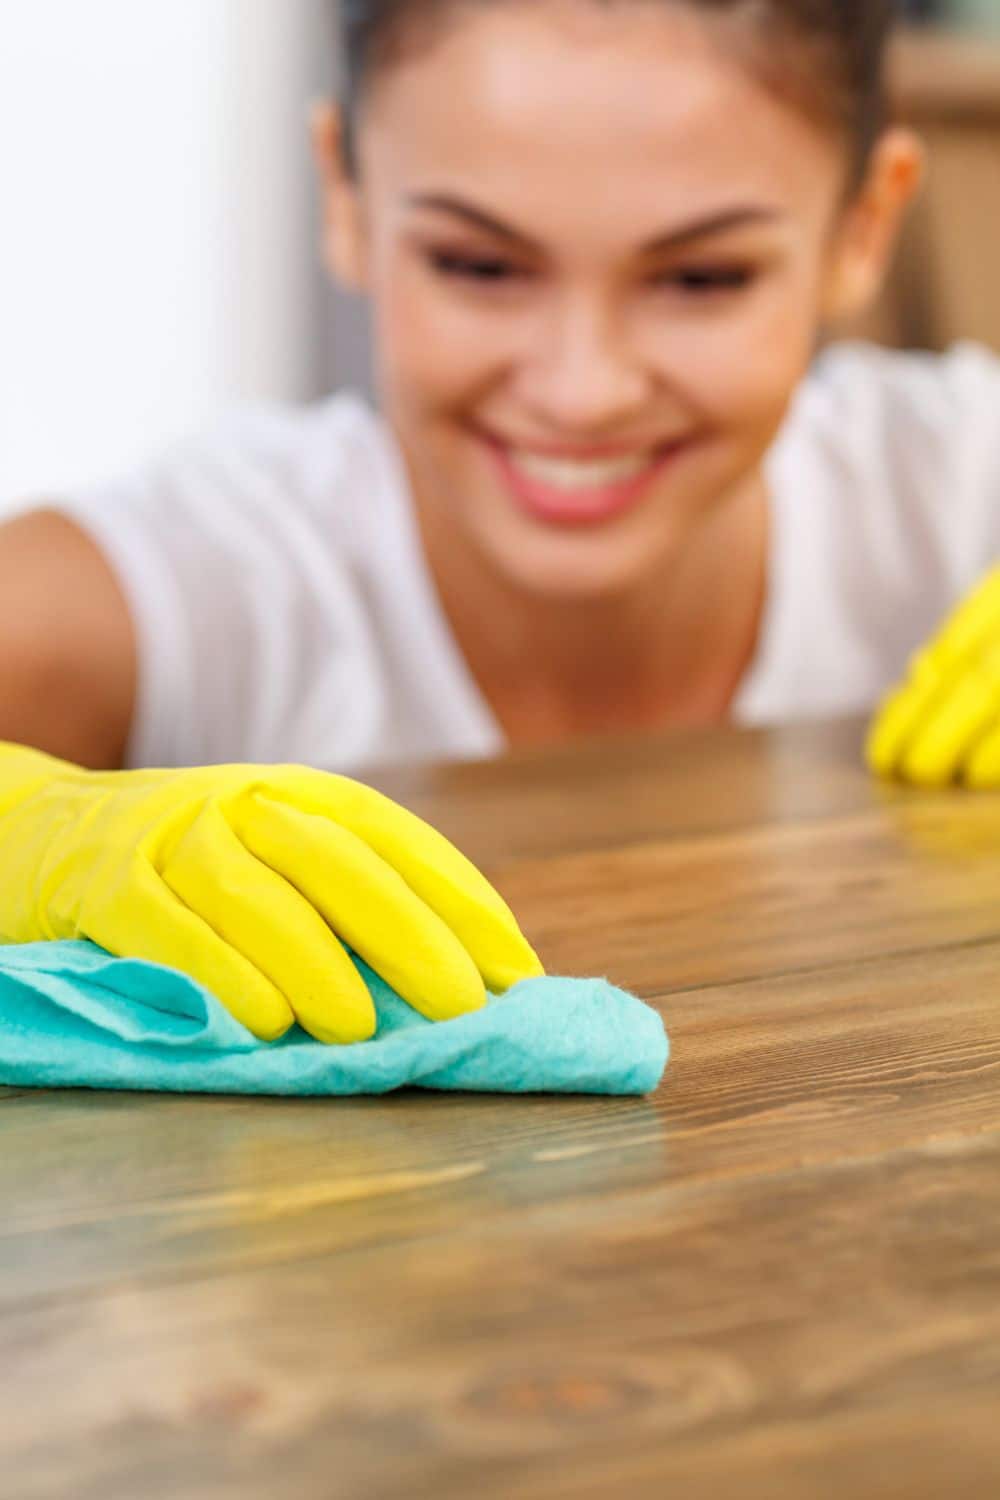 5 Areas In Your Home You Usually Forget To Clean